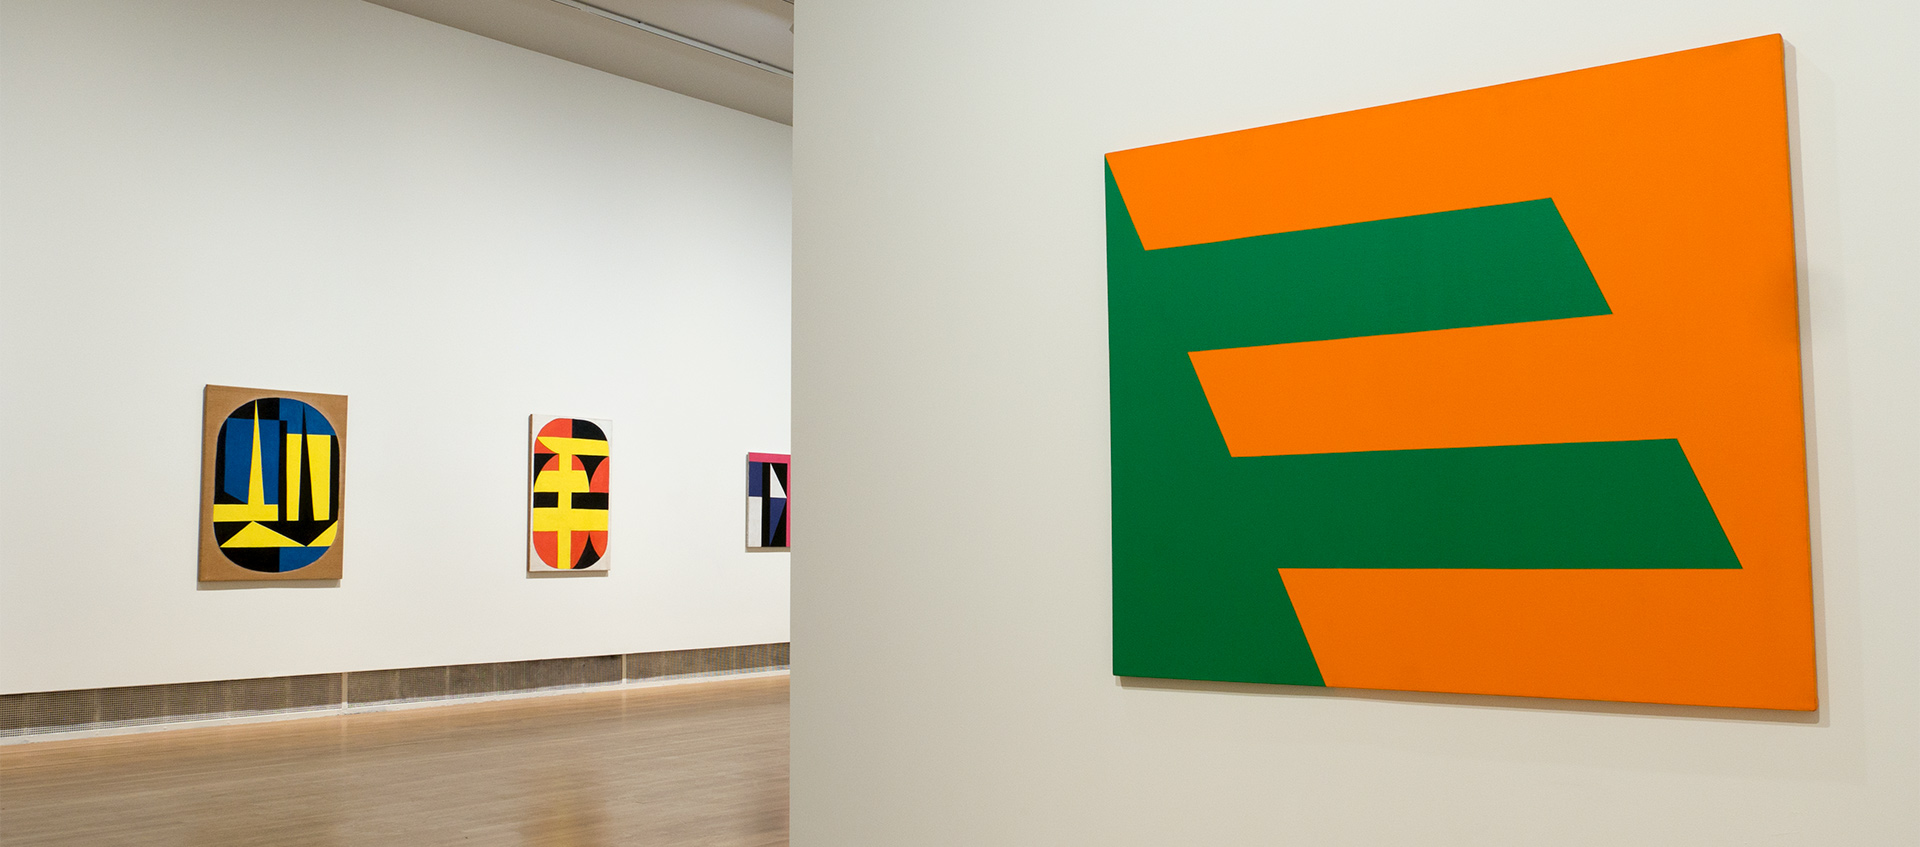 Installation of Carmen Herrera works at the entrance to the Wexner Center galleries